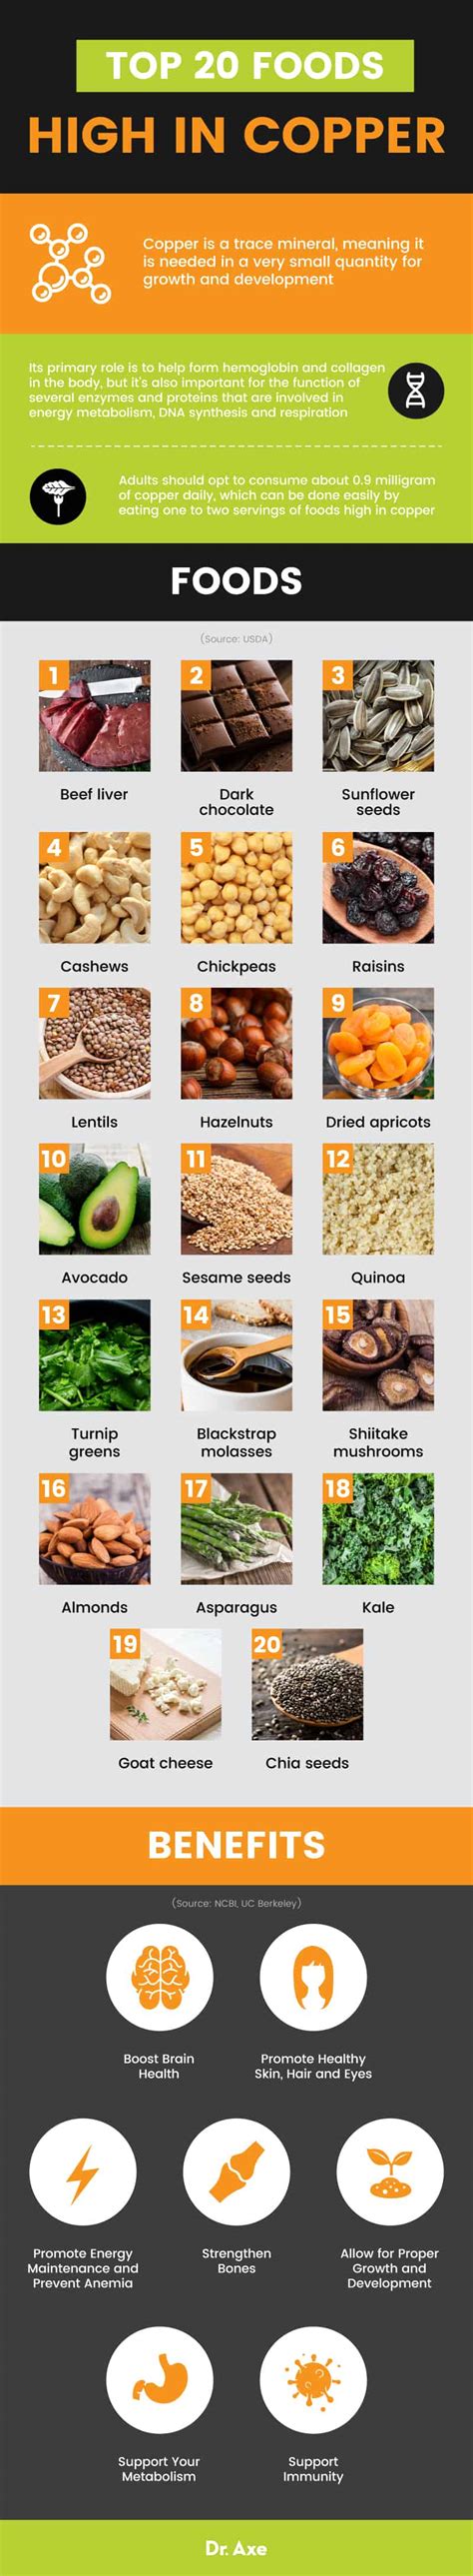 Foods High In Copper How To Get More Copper In Your Diet Dr Axe